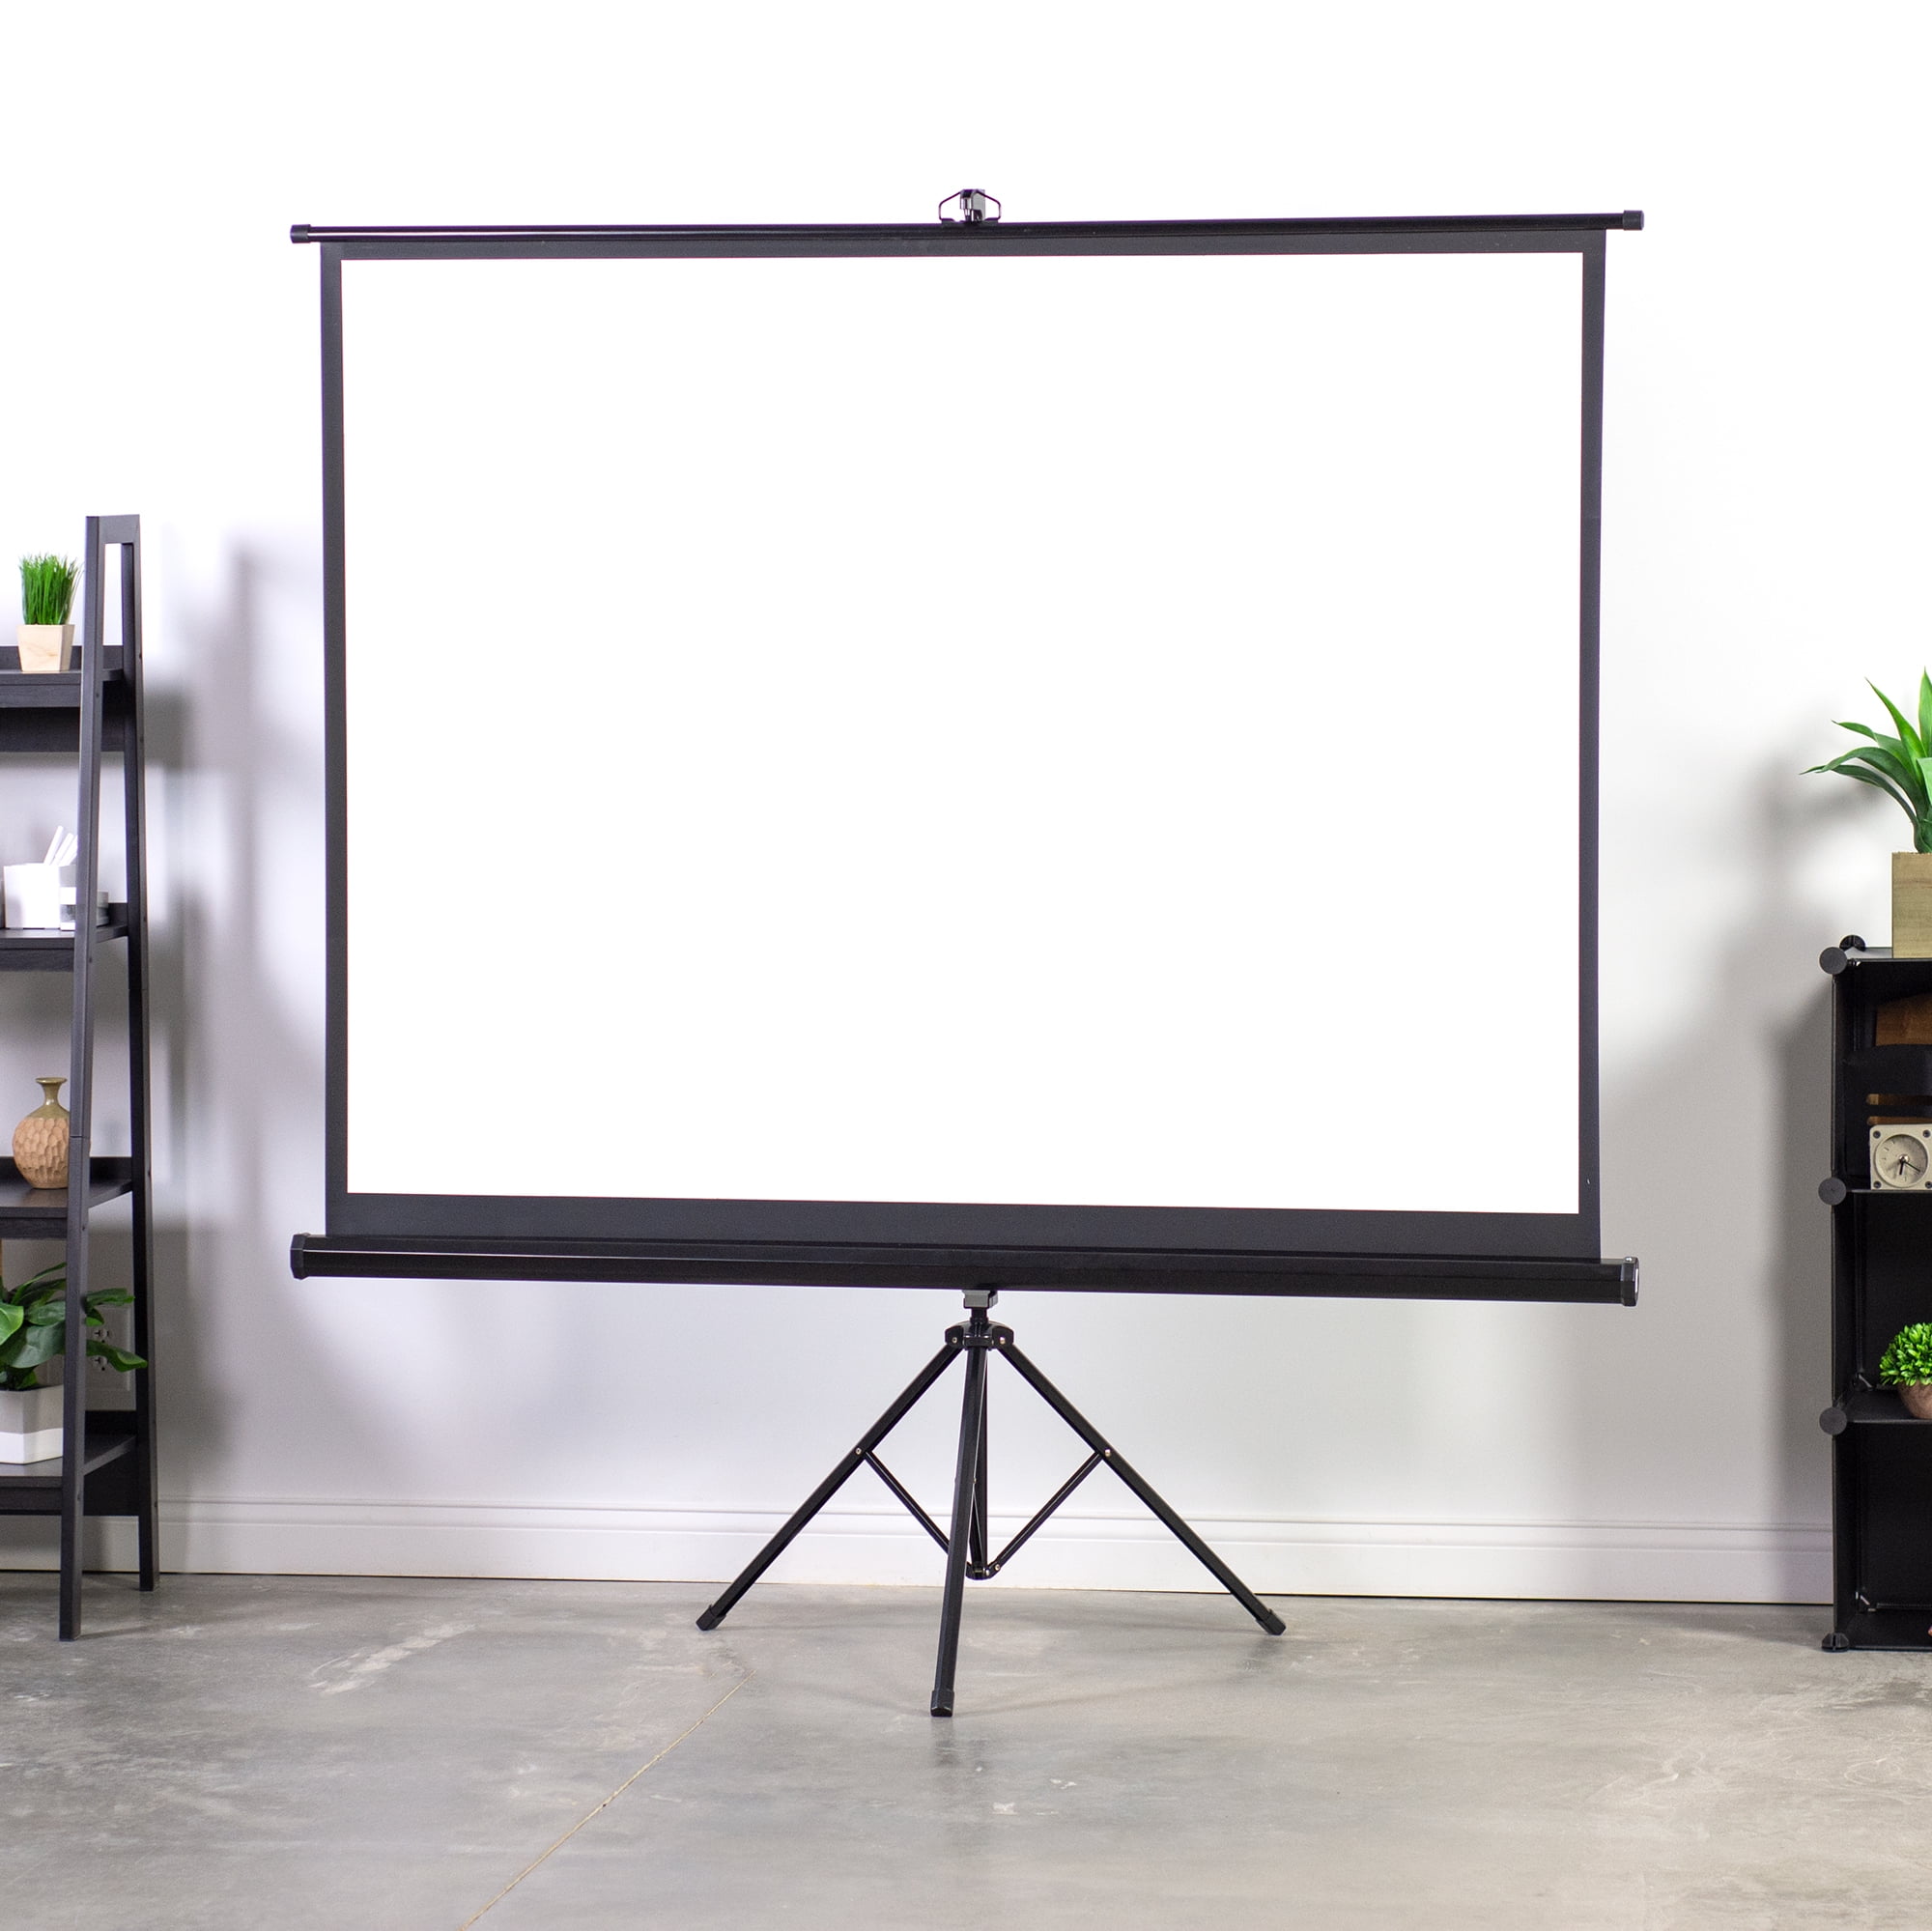 100" 4:3 Projector Screen Portable Indoor Outdoor Projection with Stand Tripod 